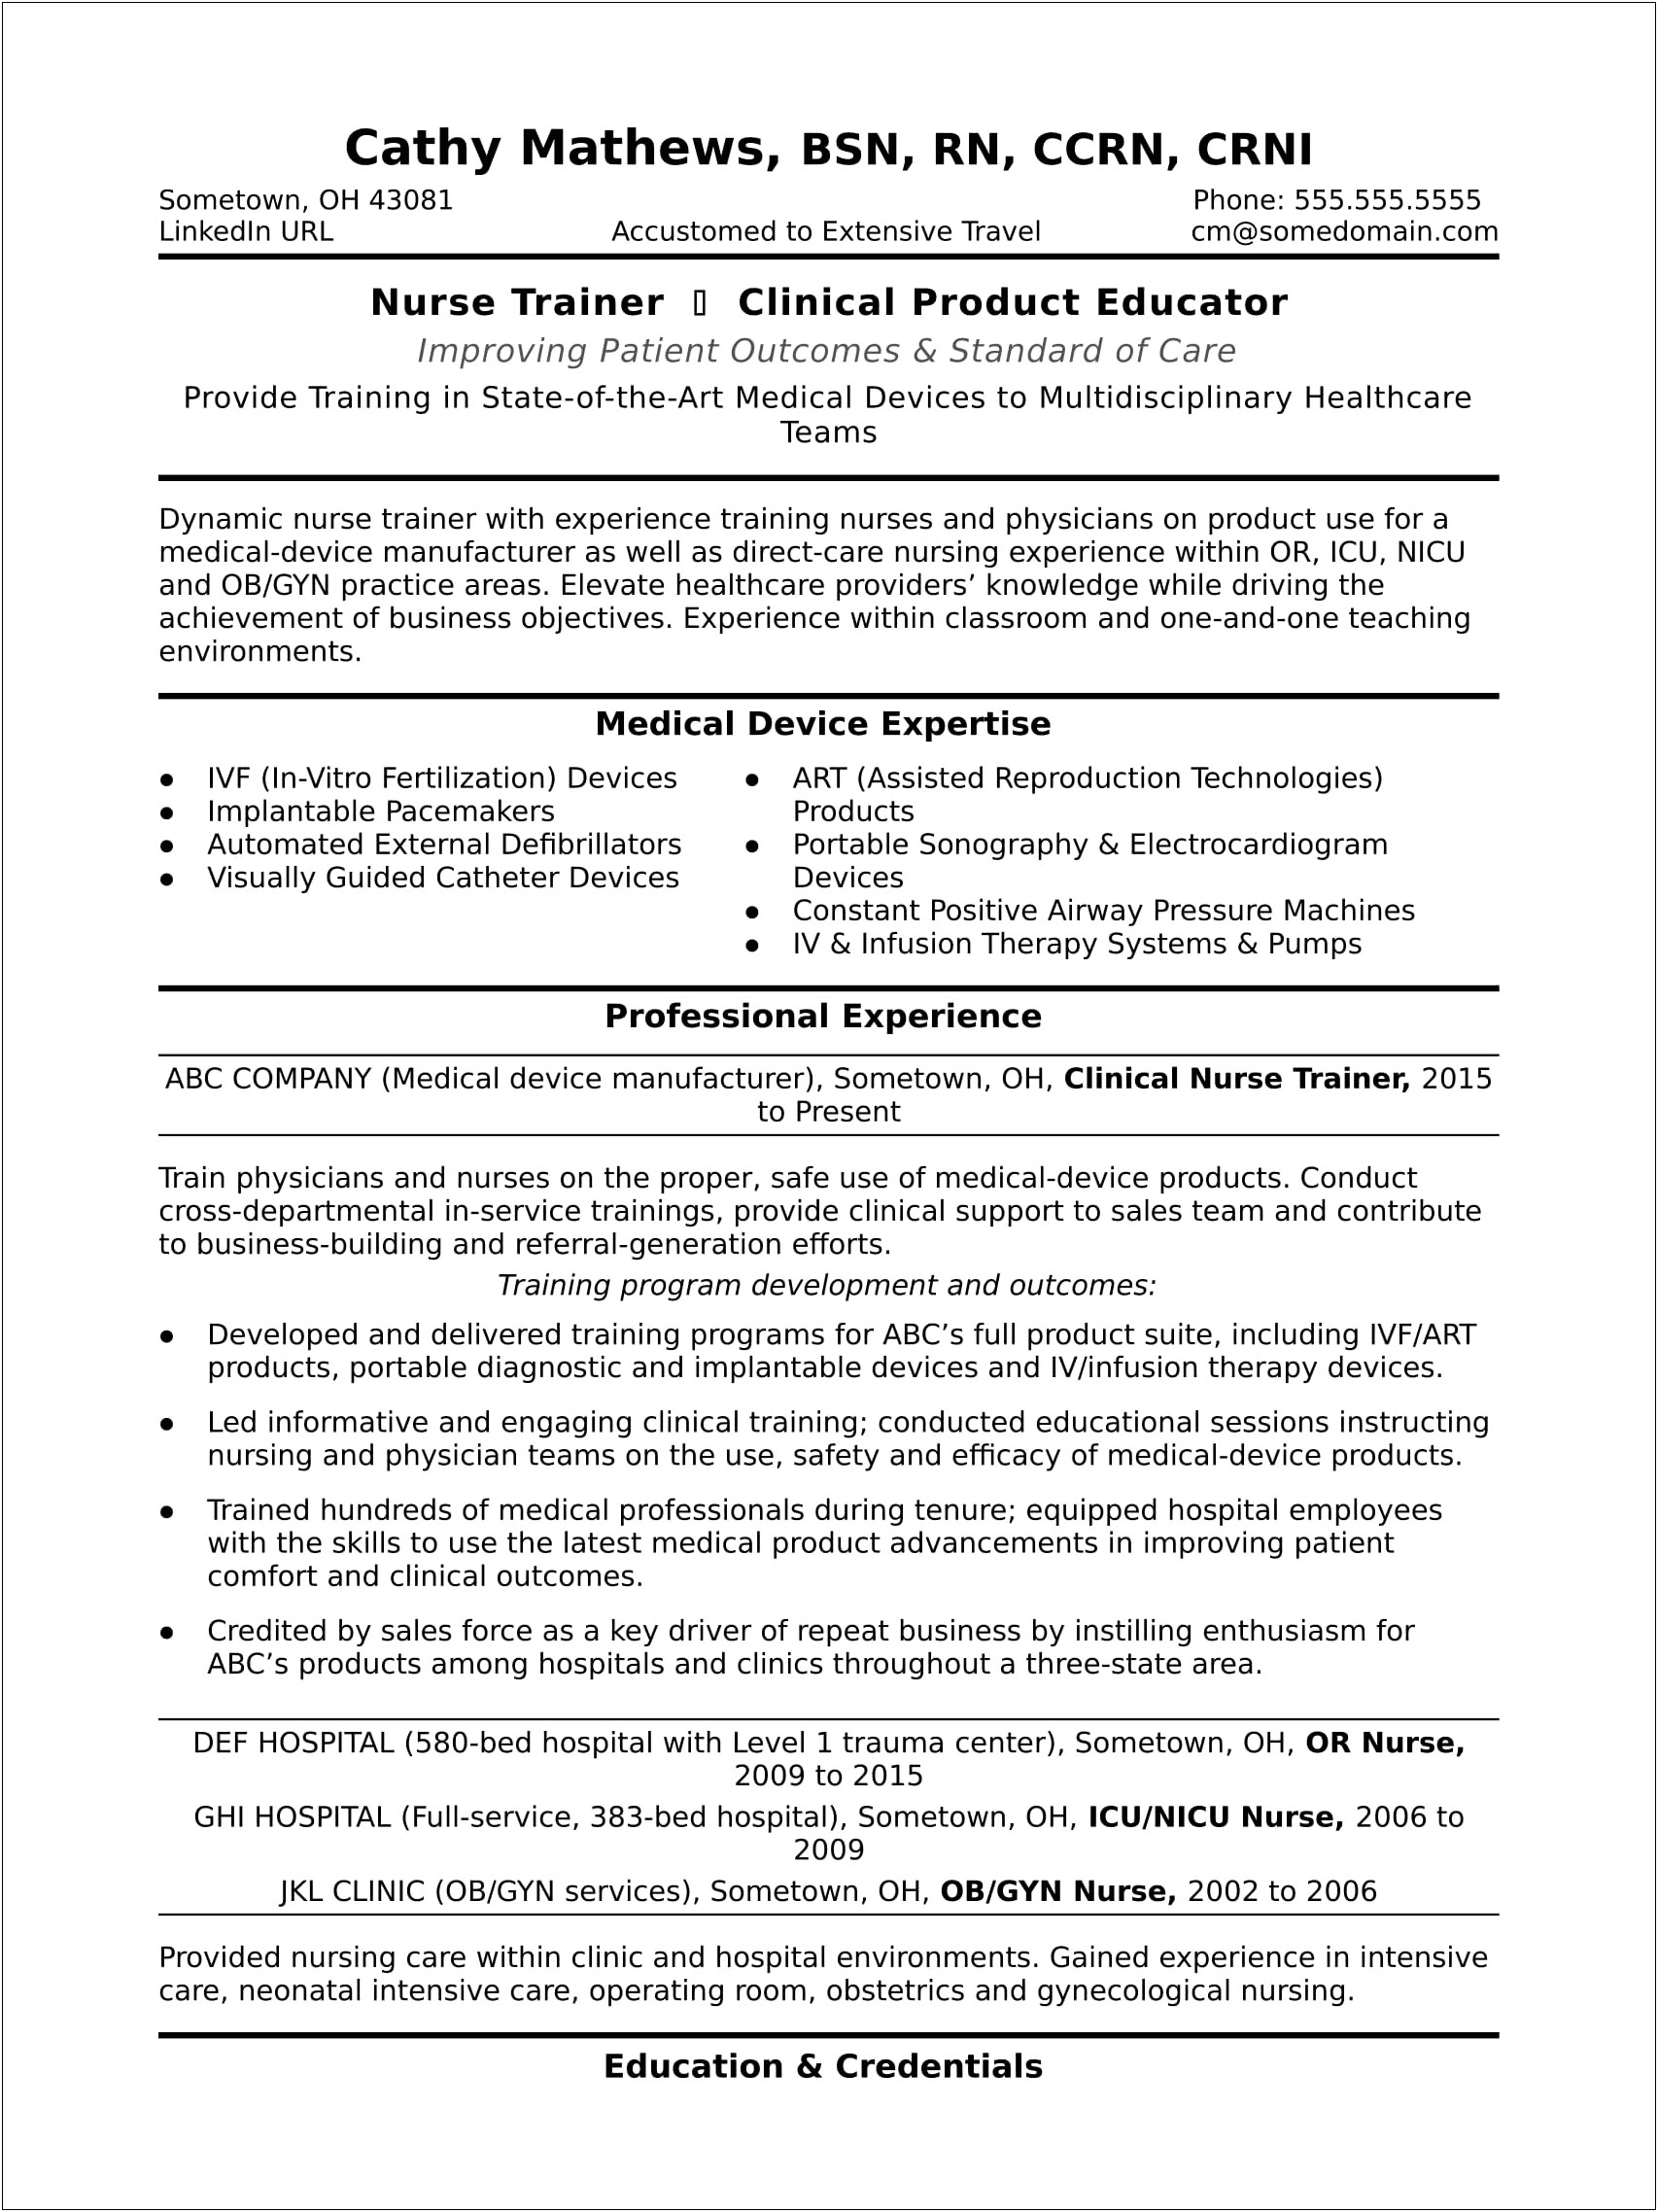 Resume Career Objective Examples Nurse